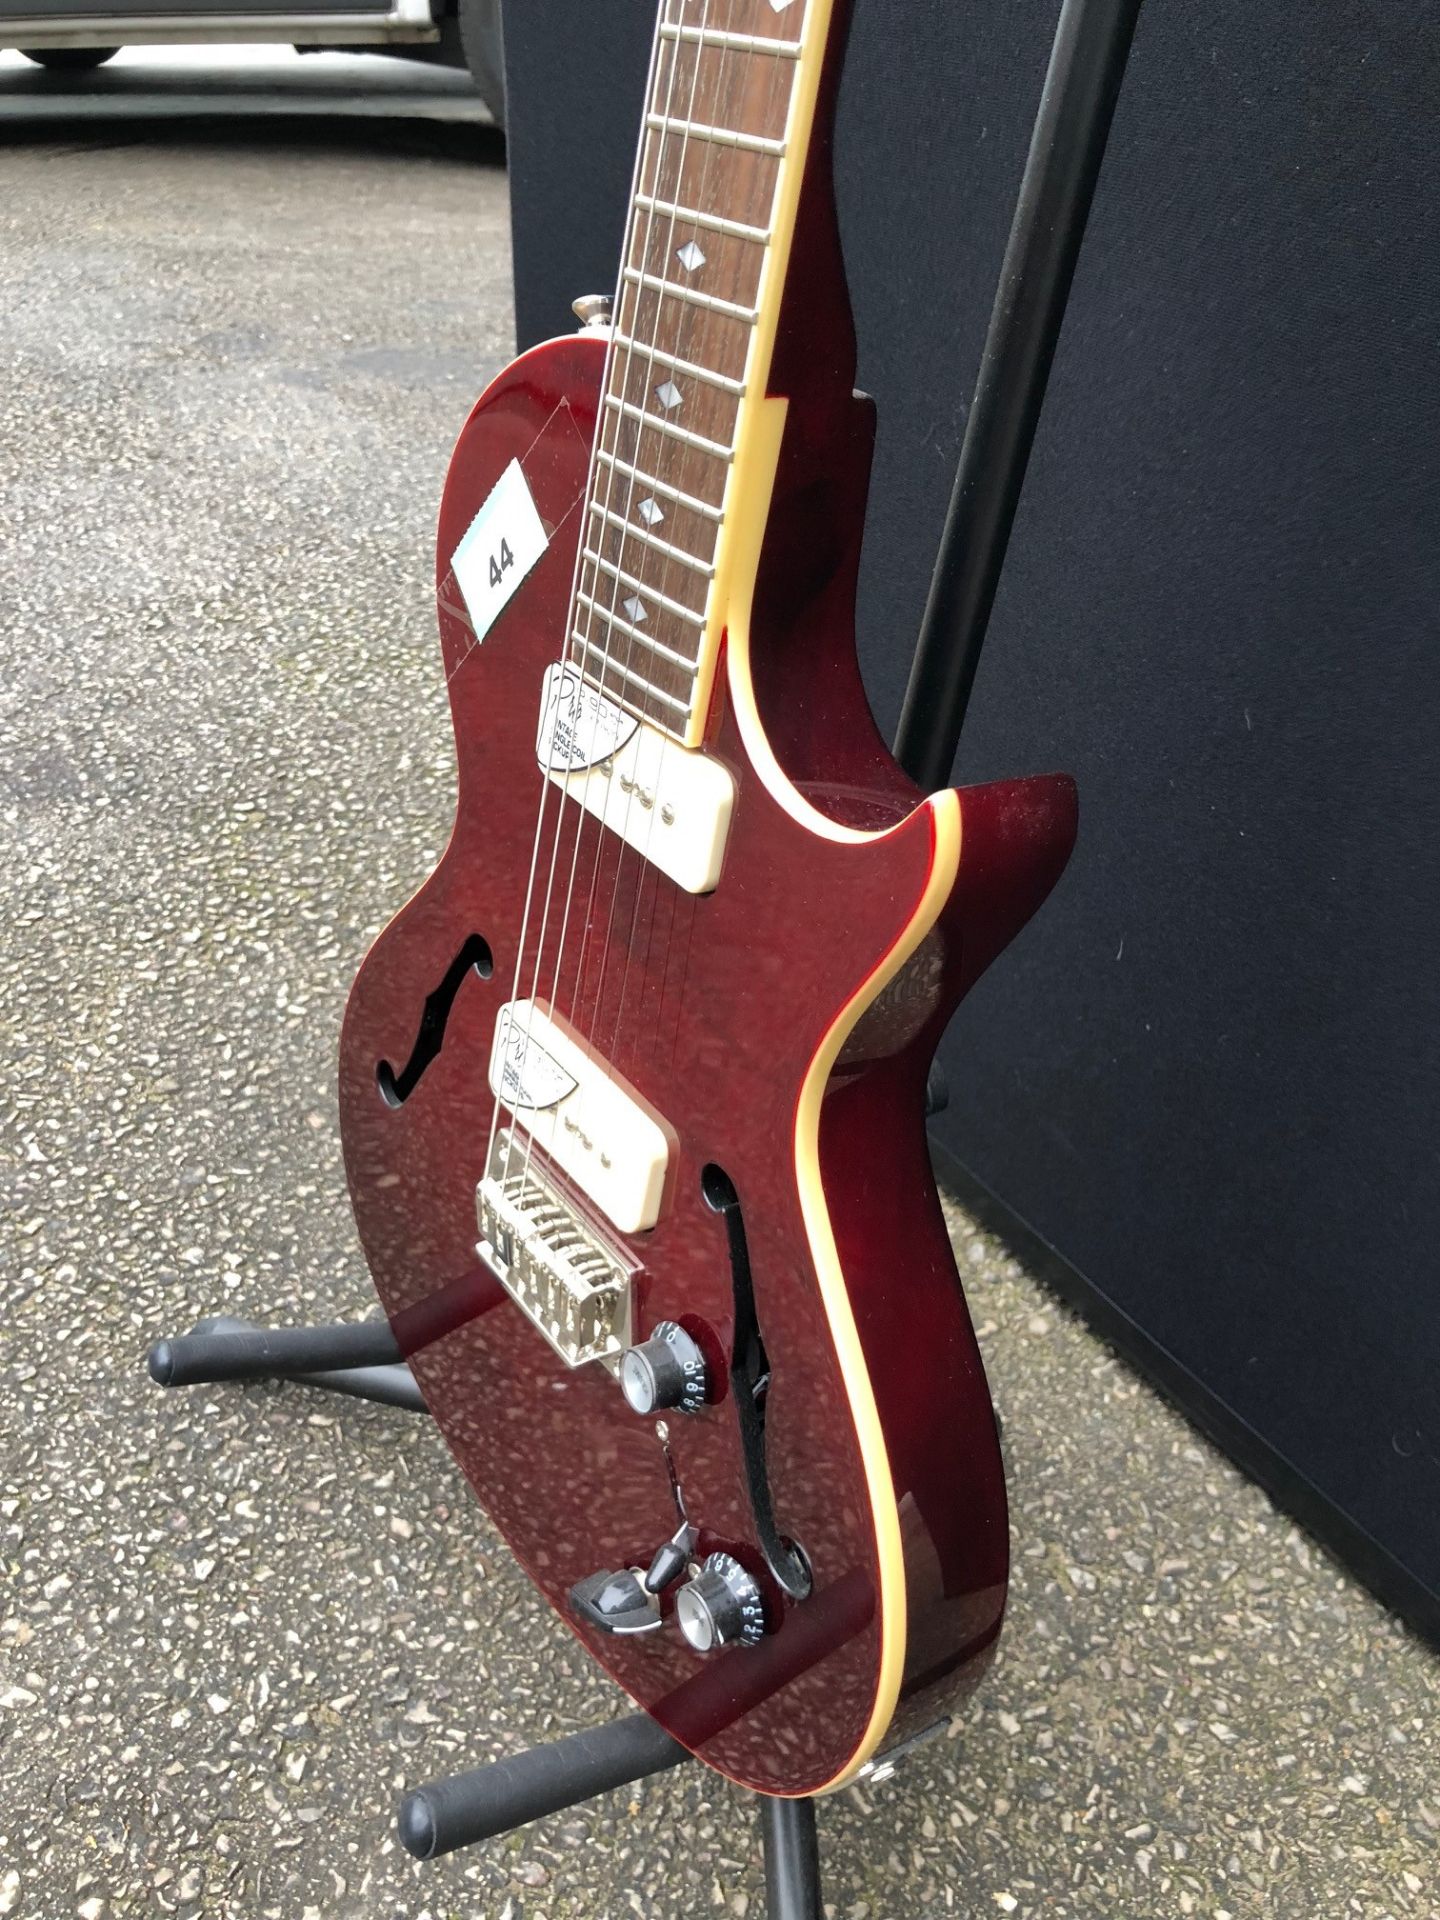 Epiphone Blueshawk Deluxe Wine Red Electric Guitar (Brand New Ex Display - RRP £499.00) - Image 5 of 6